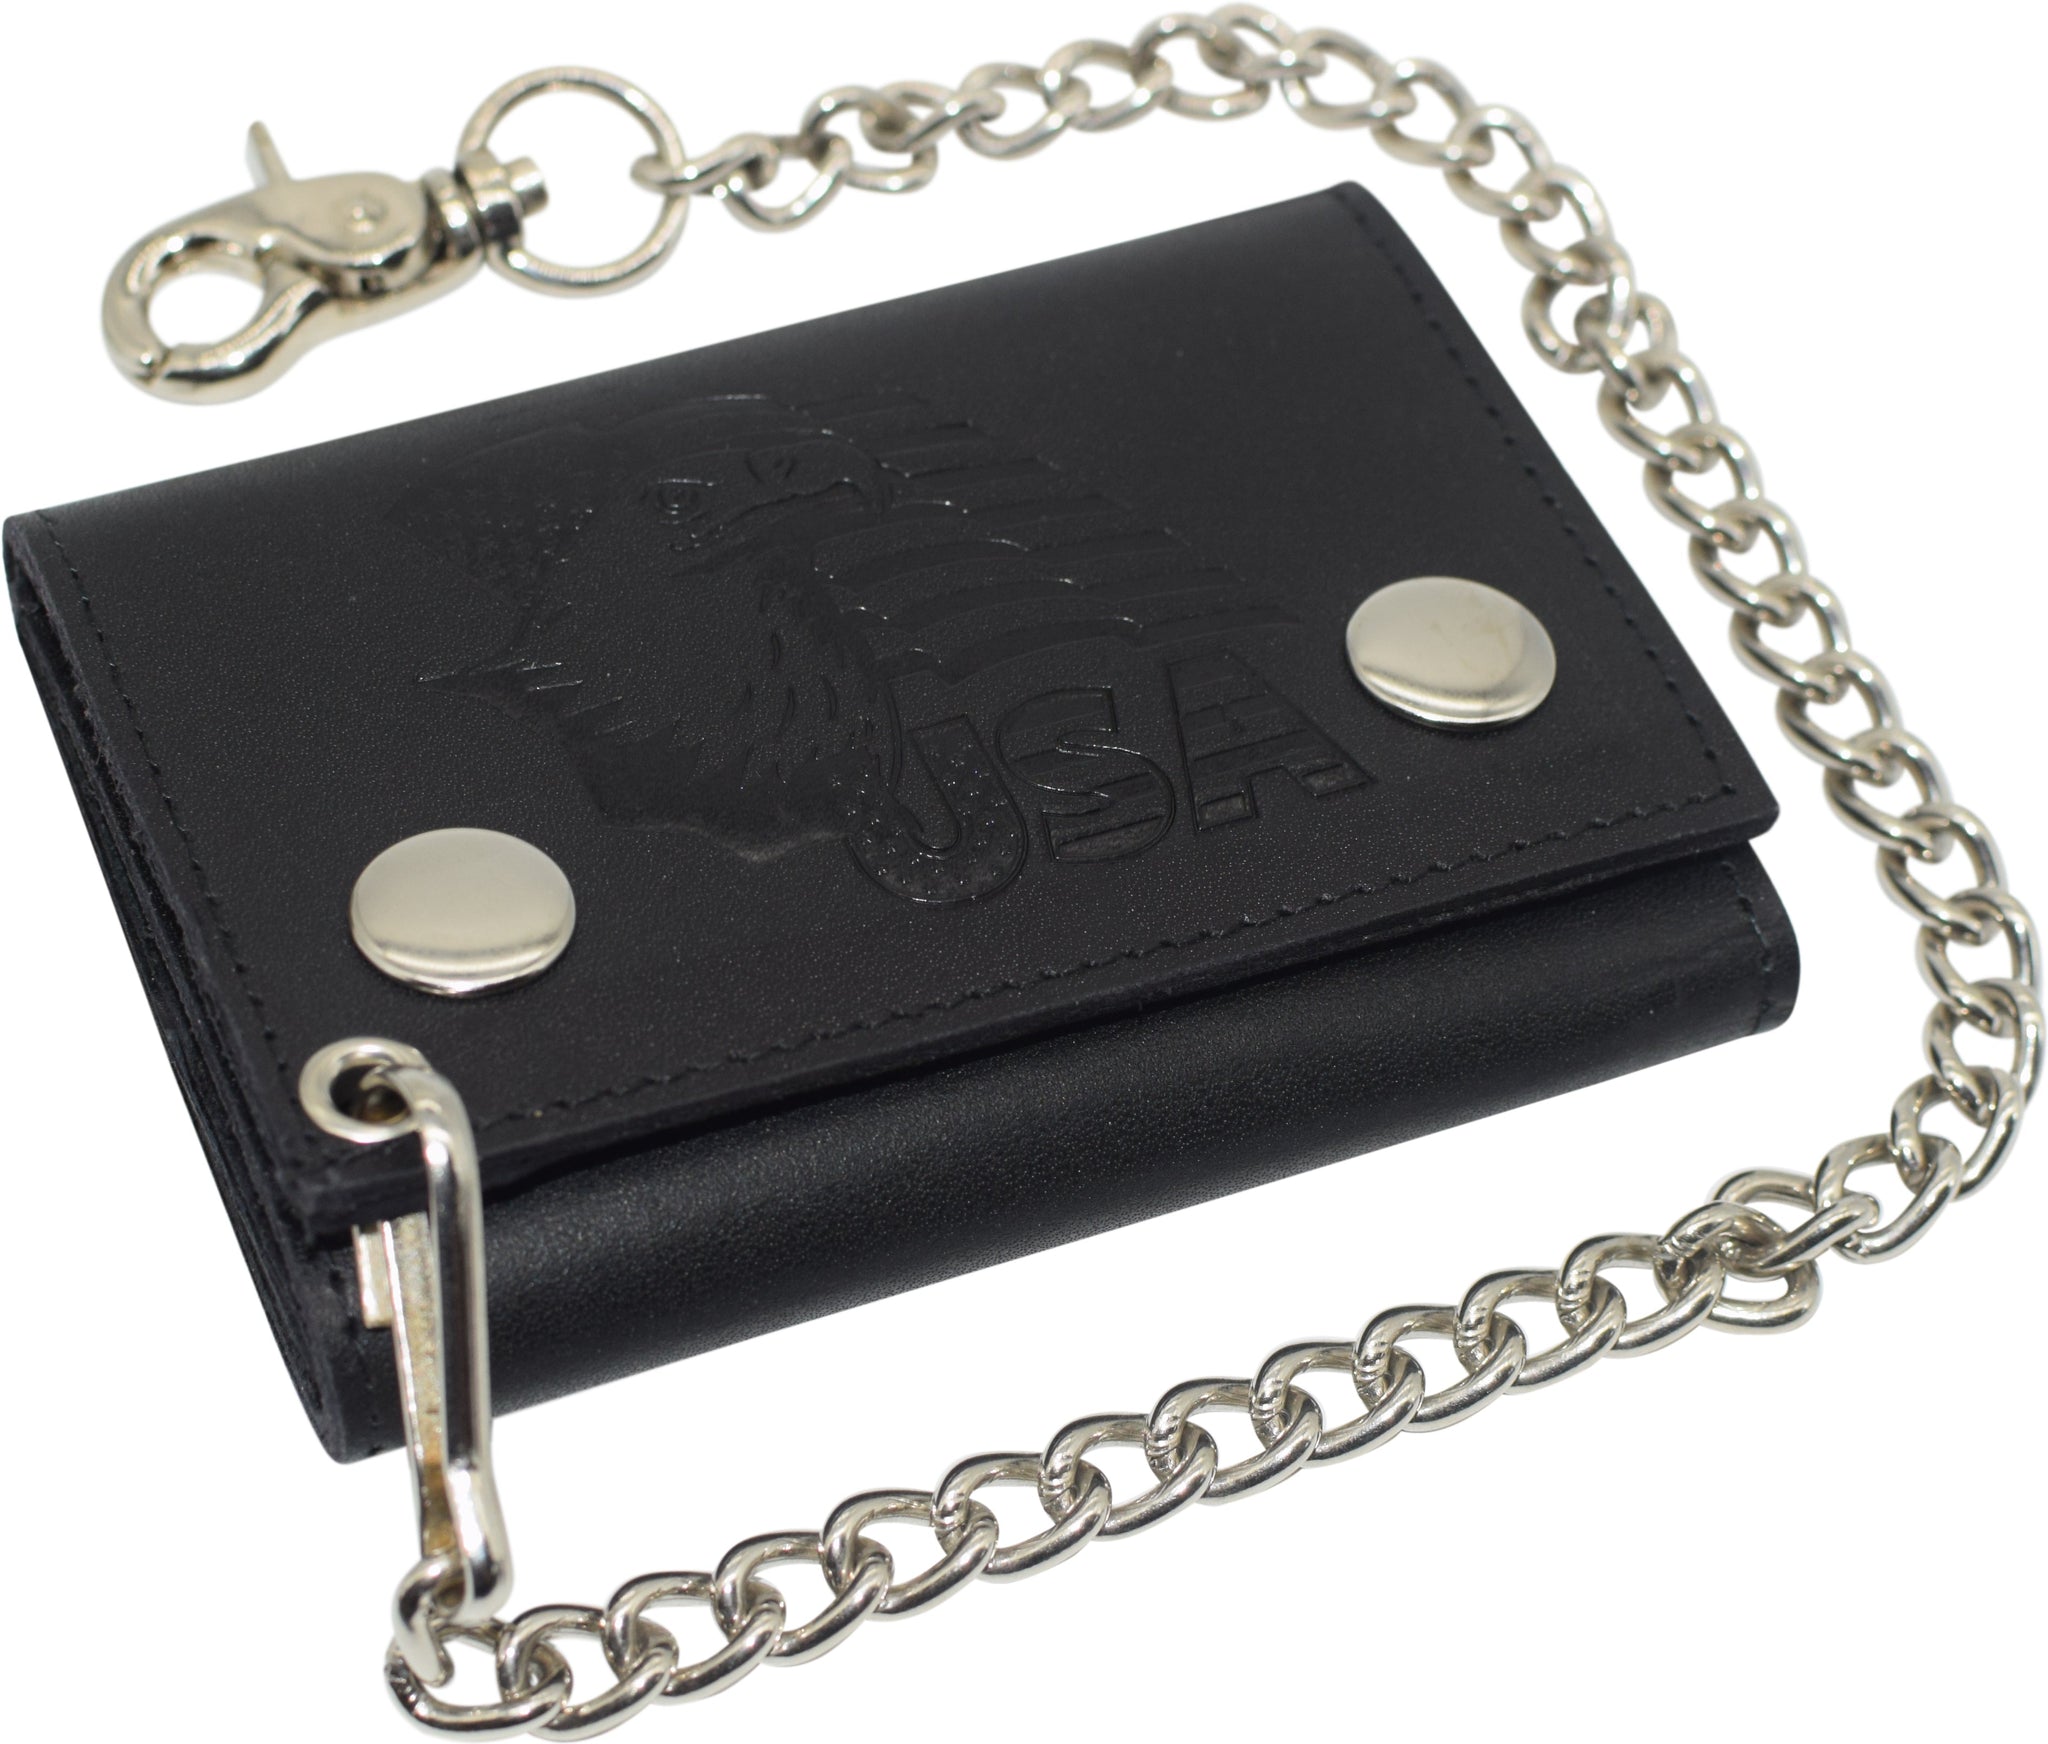 Dogtown Vintage Cross Small Leather Trifold Chain Wallet